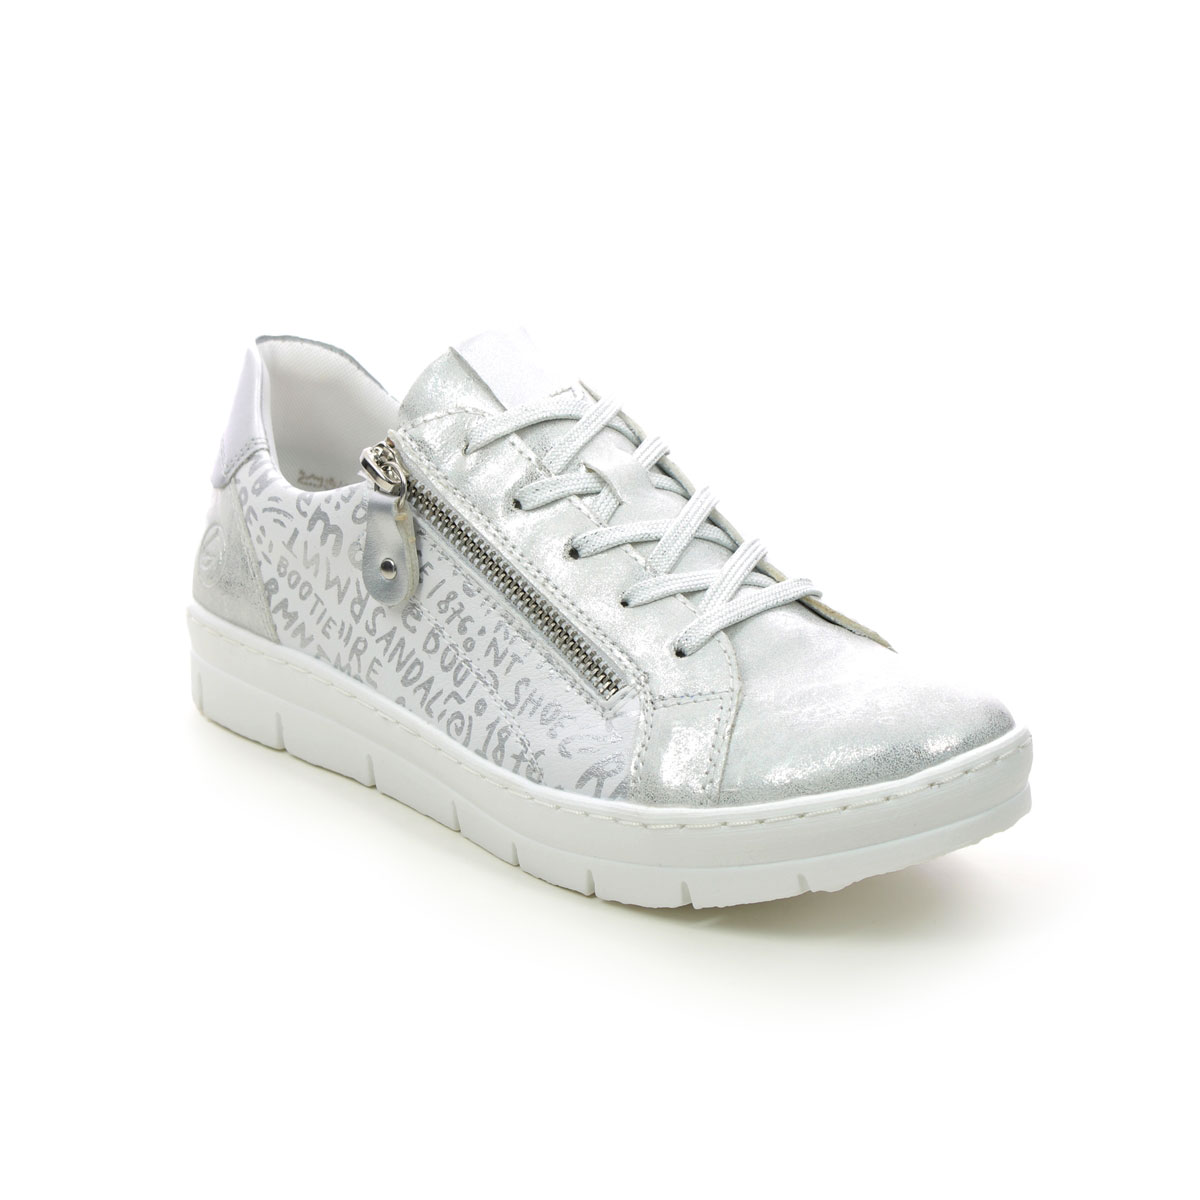 Remonte Ravenna 11 White Silver Womens Lacing Shoes D5821-80 In Size 36 In Plain White Silver